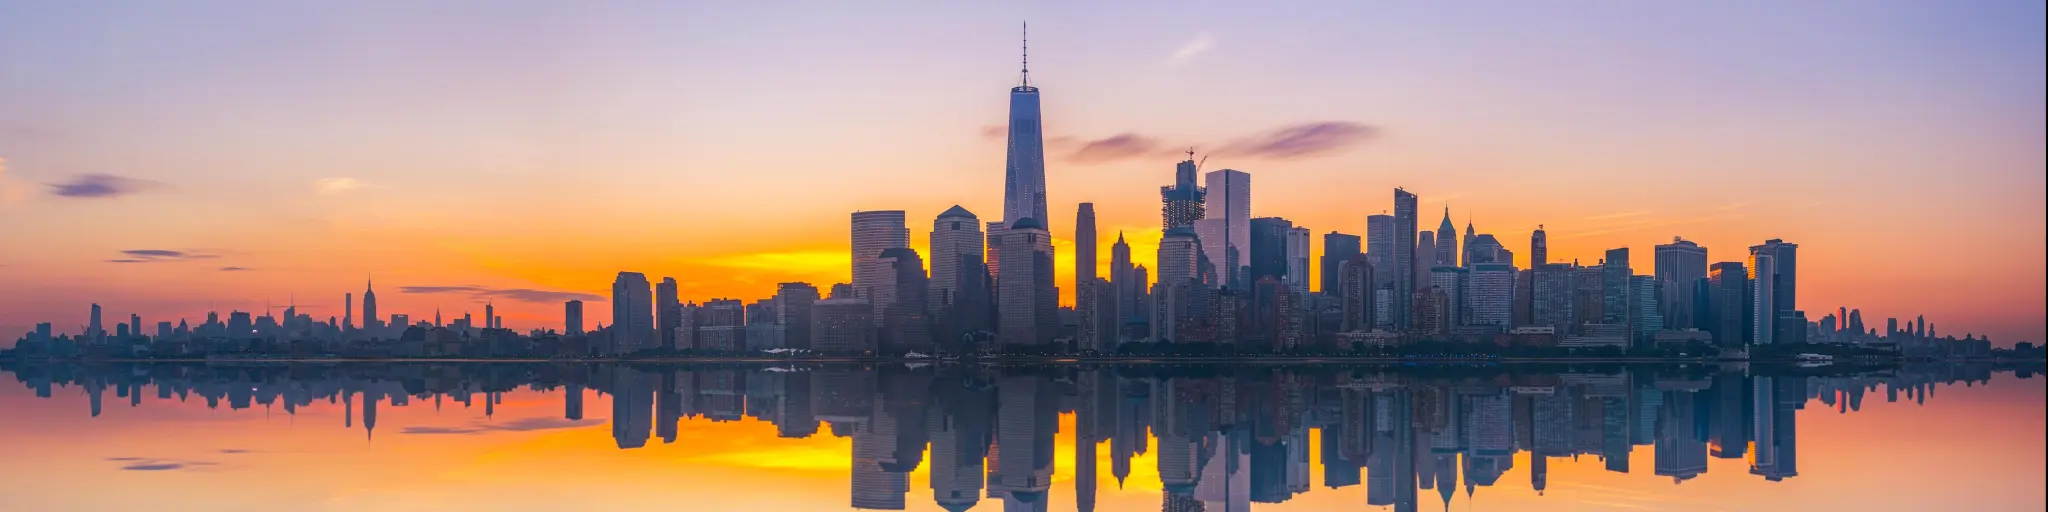 NYC skyline reflected in the water in pastel colors